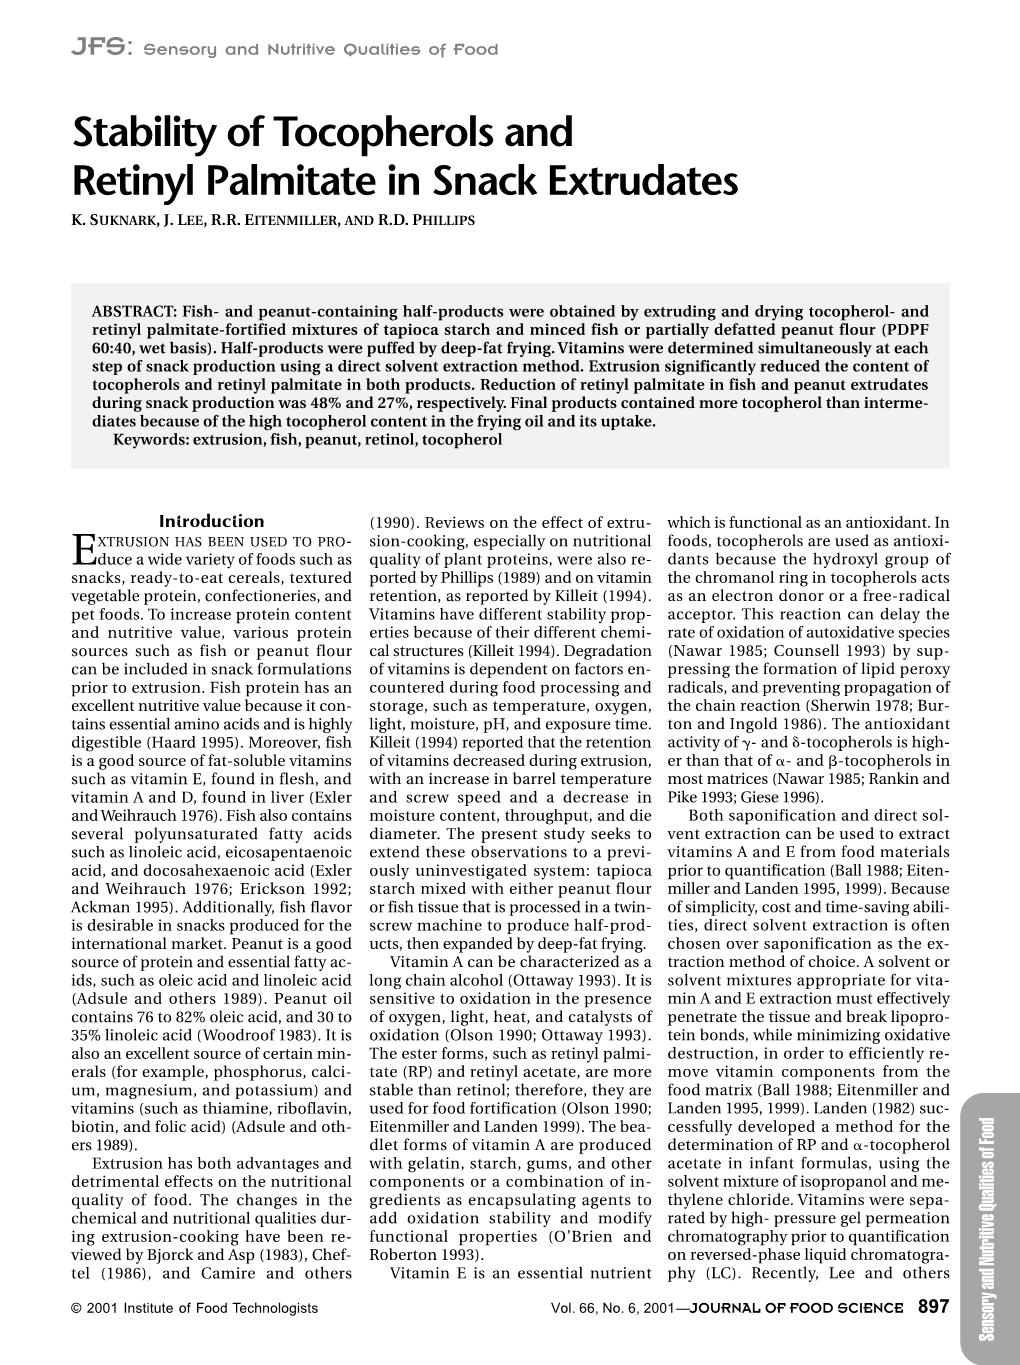 Stability of Tocopherols and Retinyl Palmitate in Snack Extrudates K